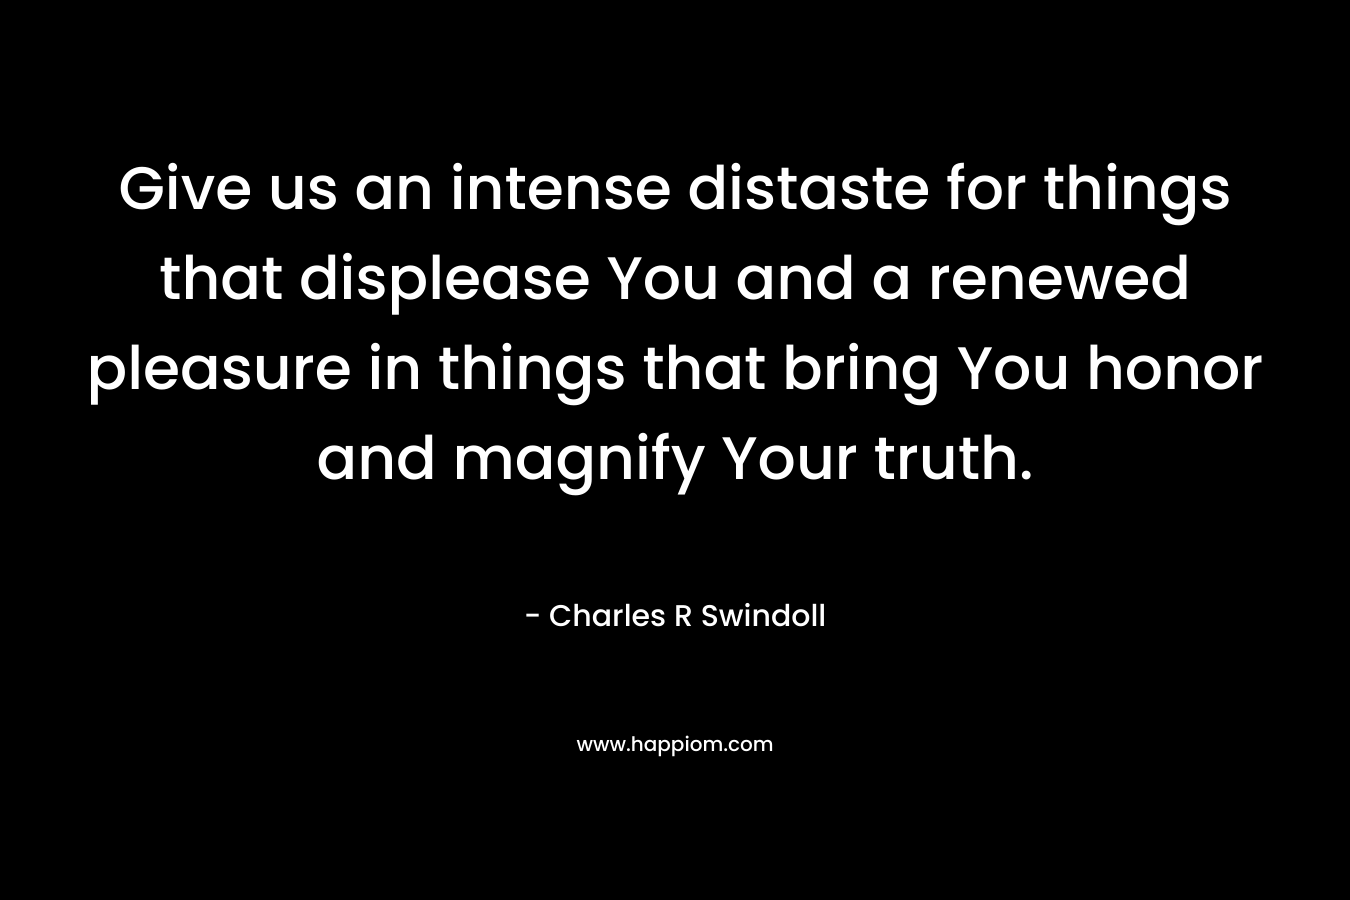 Give us an intense distaste for things that displease You and a renewed pleasure in things that bring You honor and magnify Your truth. – Charles R Swindoll